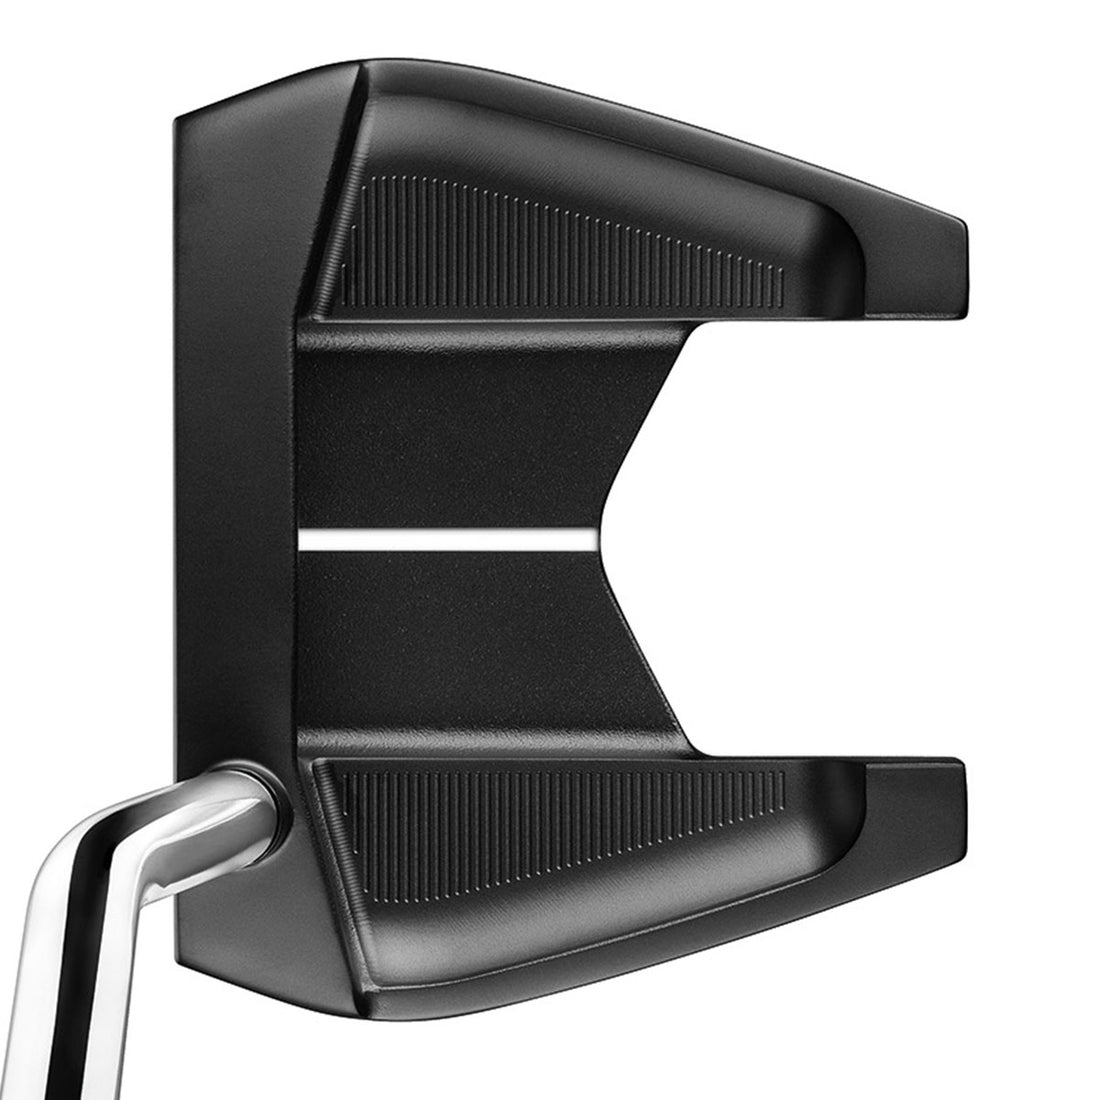 TAYLORMADE TP BLACK COLLECTION PALISADES #7 PUTTER